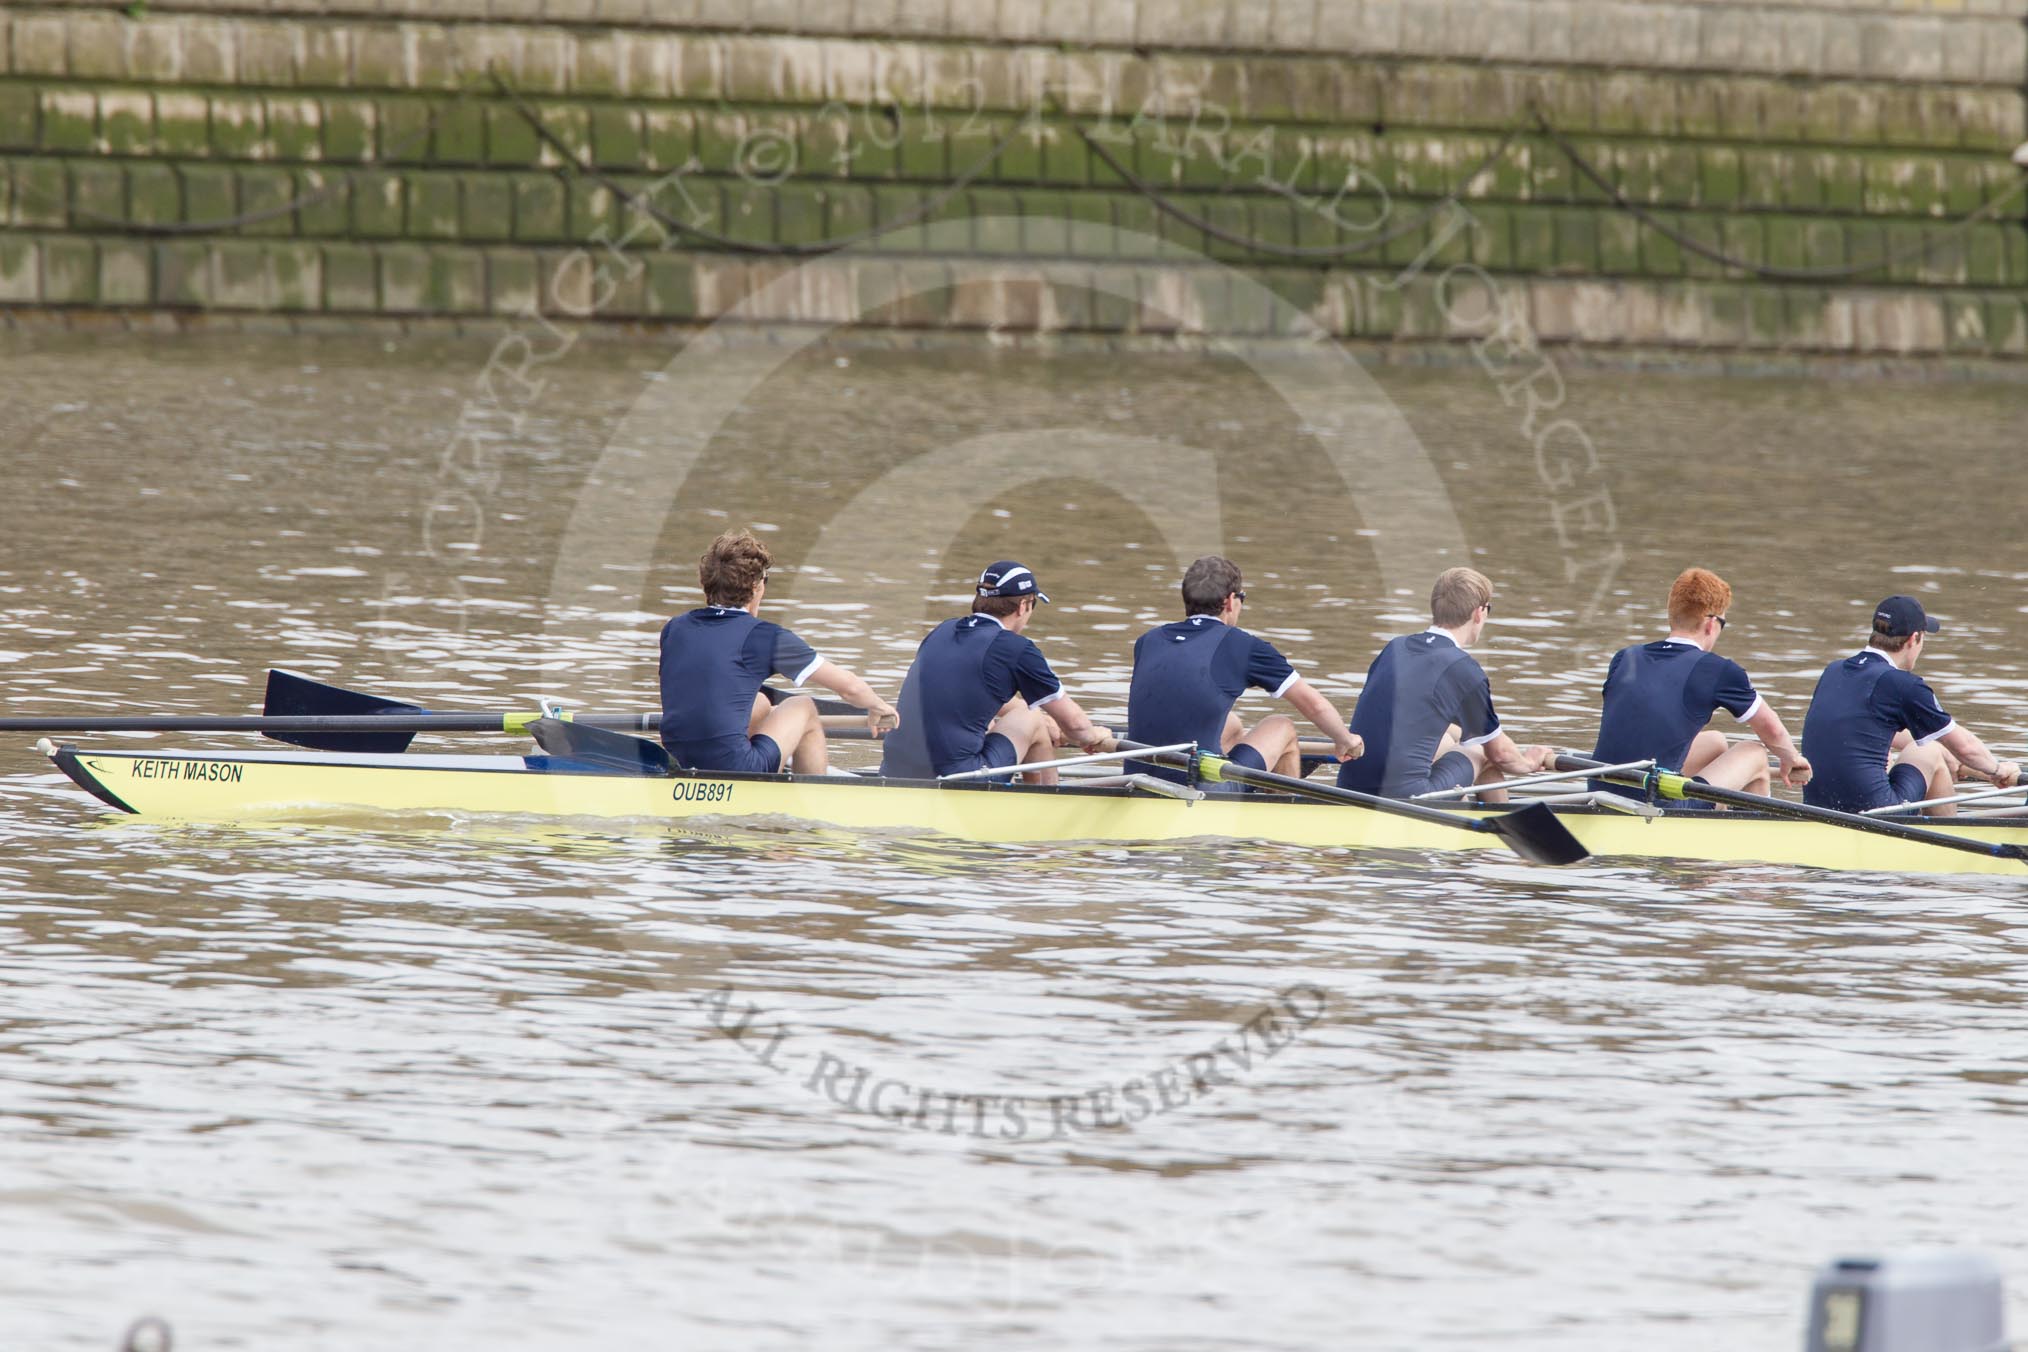 The Boat Race 2012: Isis, the Oxford reserve boat, leading the Isis/Goldie Boat Race. Bow Thomas Hilton, Chris Fairweather, Julian Bubb-Humfryes, Ben Snodin, Joseph Dawson, and Geordie Macleod..




on 07 April 2012 at 13:46, image #161